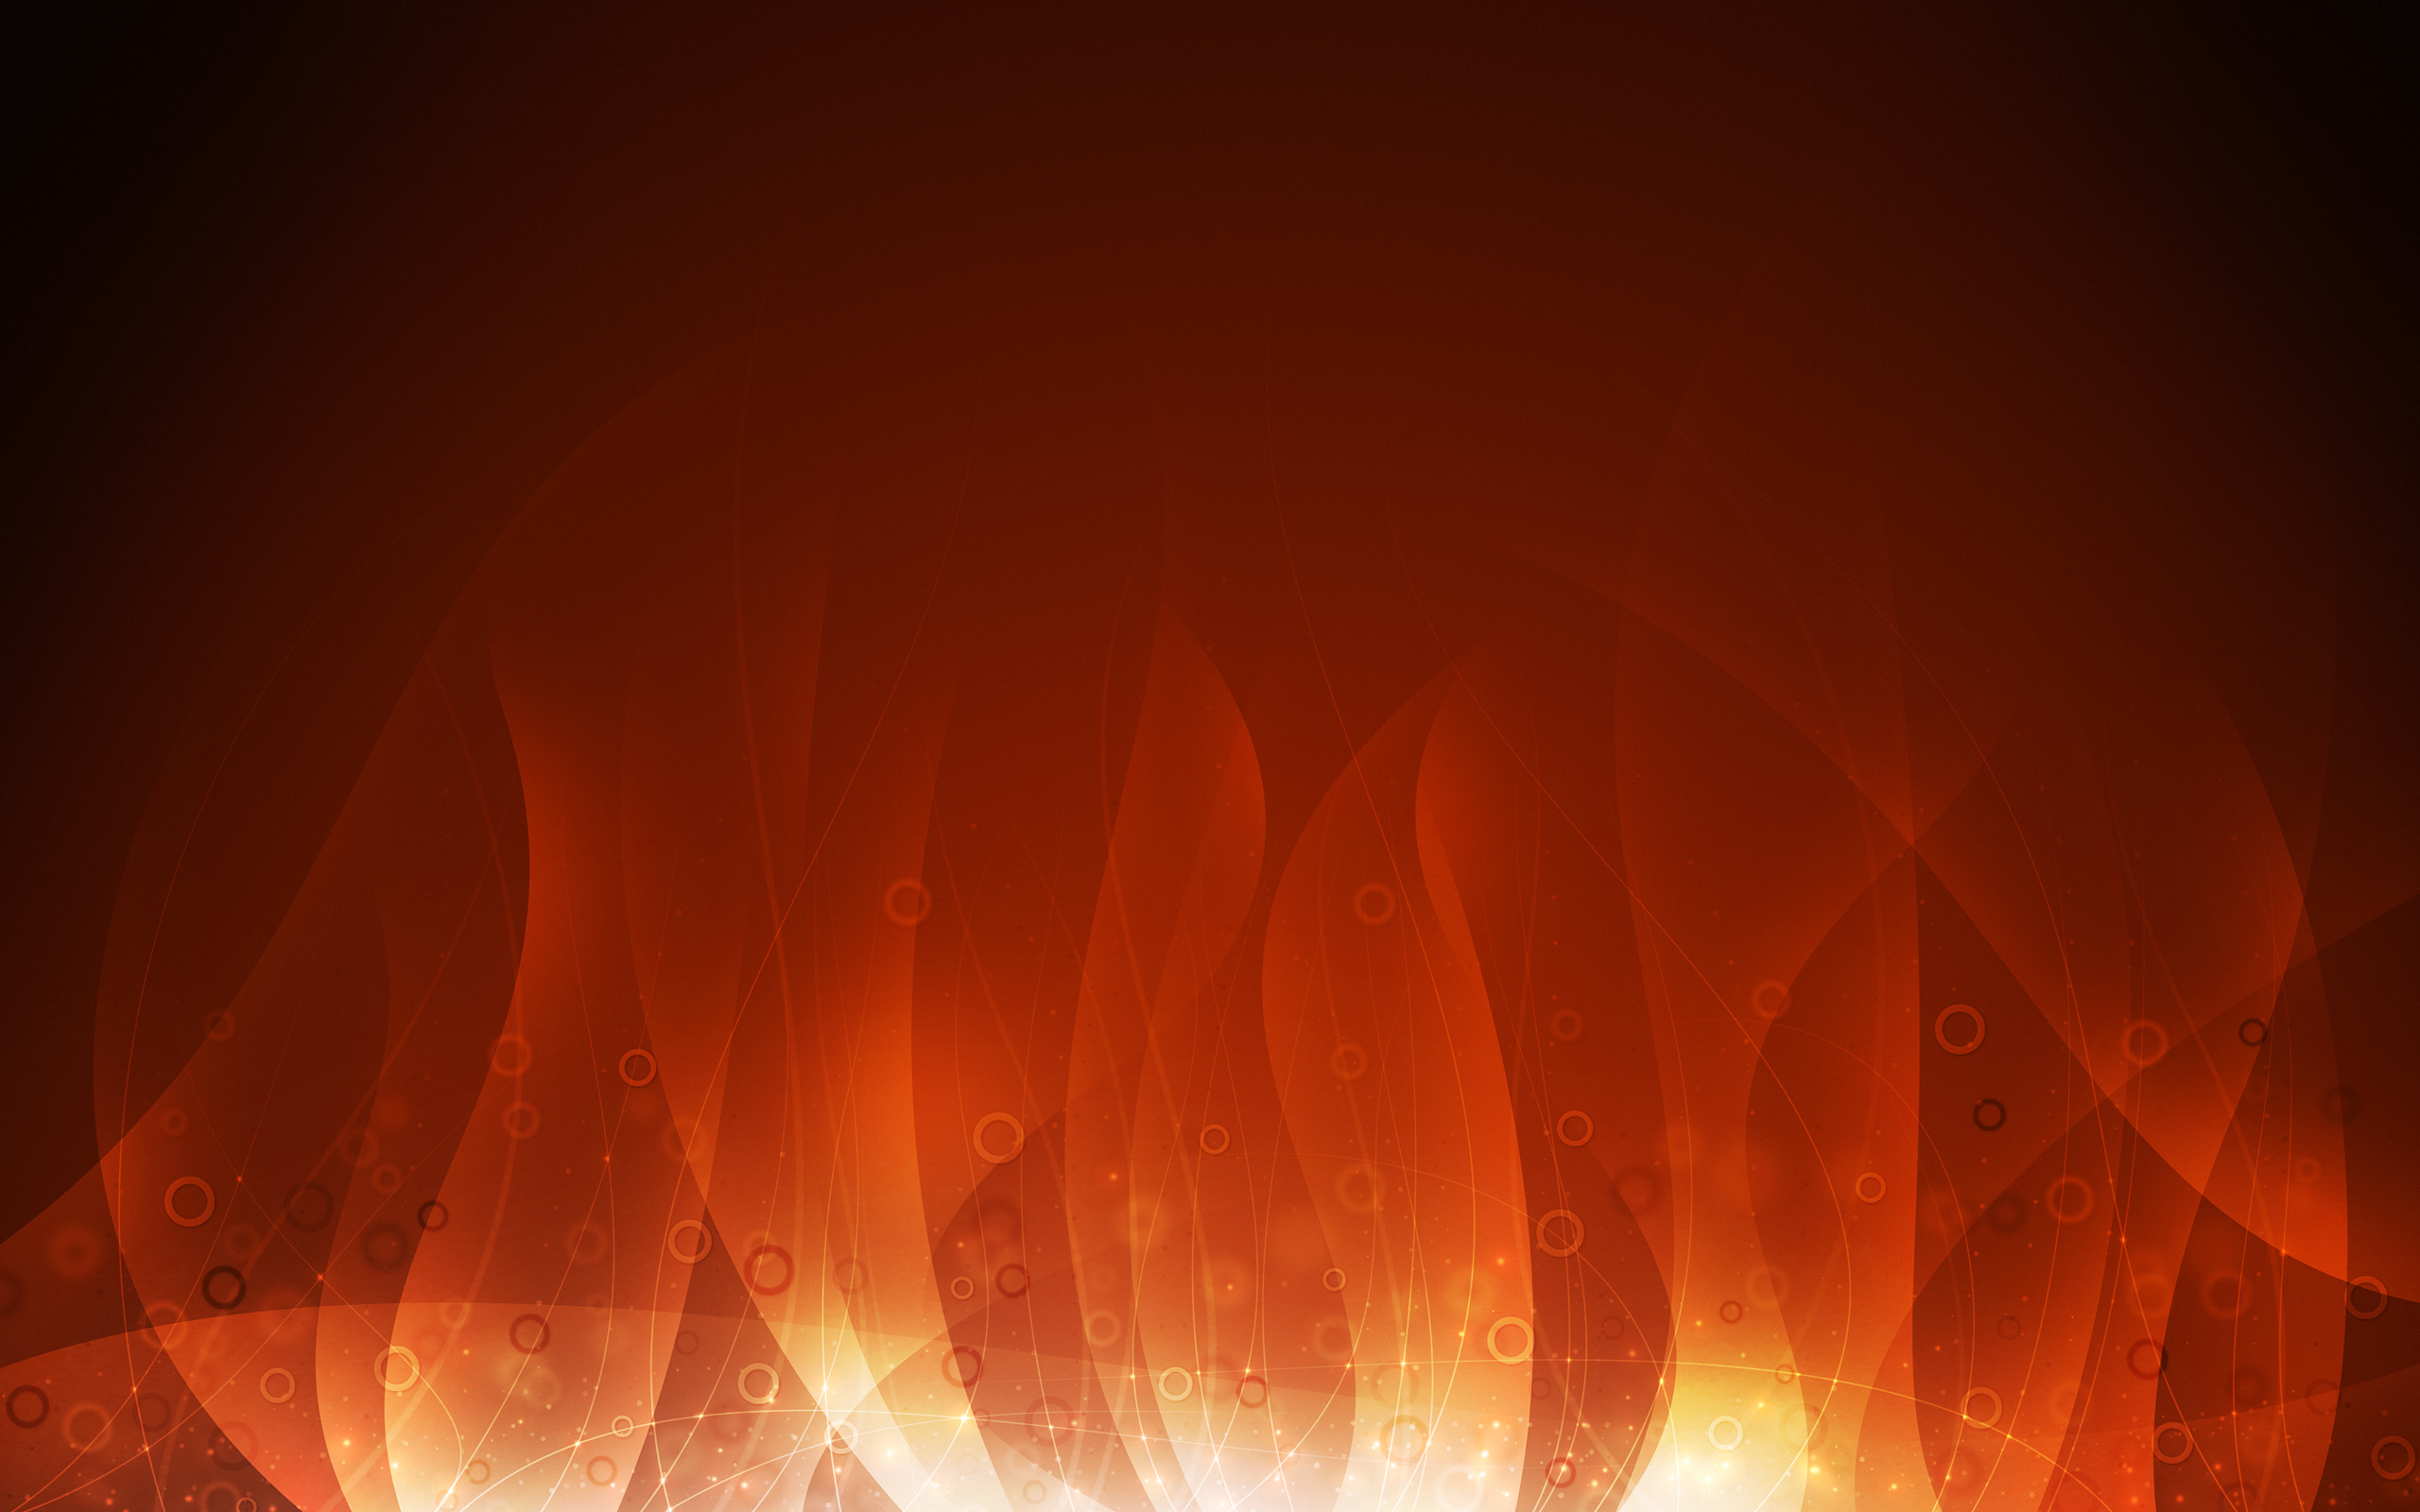 FLAME WALLPAPERS FREE Wallpapers Background images   hippowallpapers